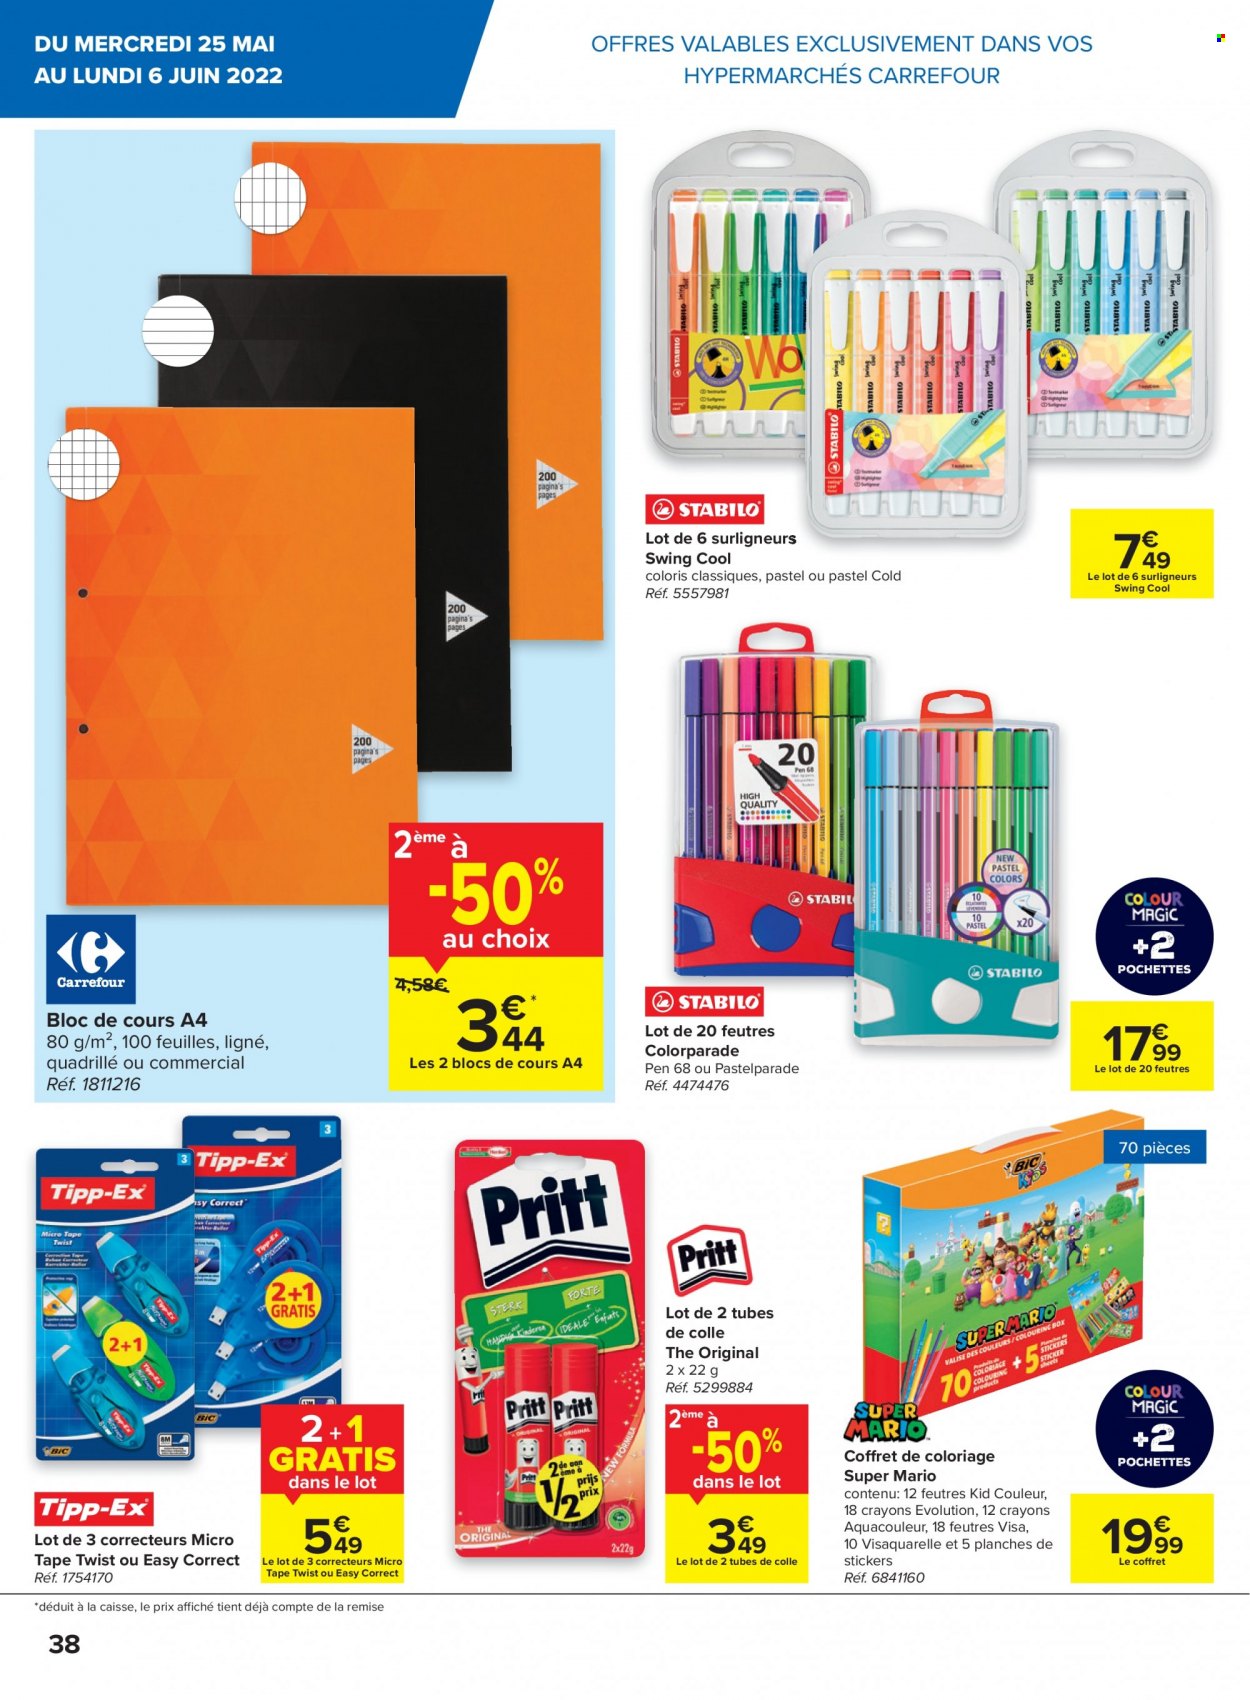 Catalogue Carrefour hypermarkt - 25.5.2022 - 31.5.2022. Page 38.